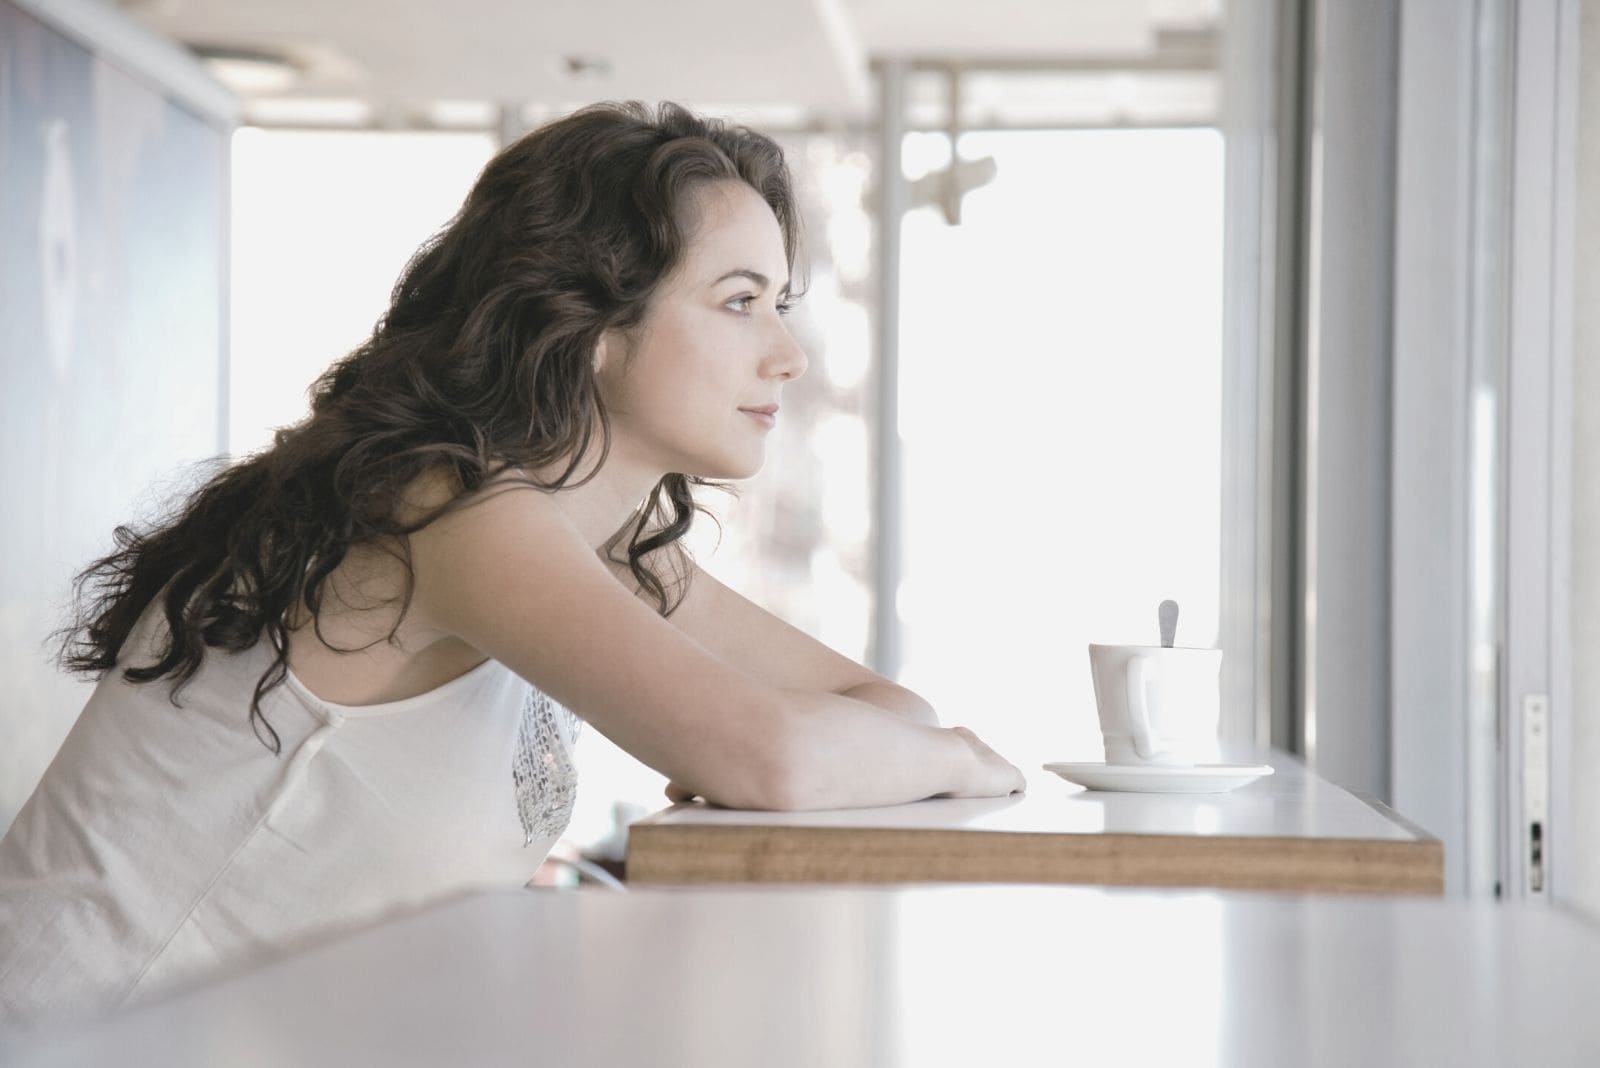 pensive woman having coffee in the morning pensively in side view